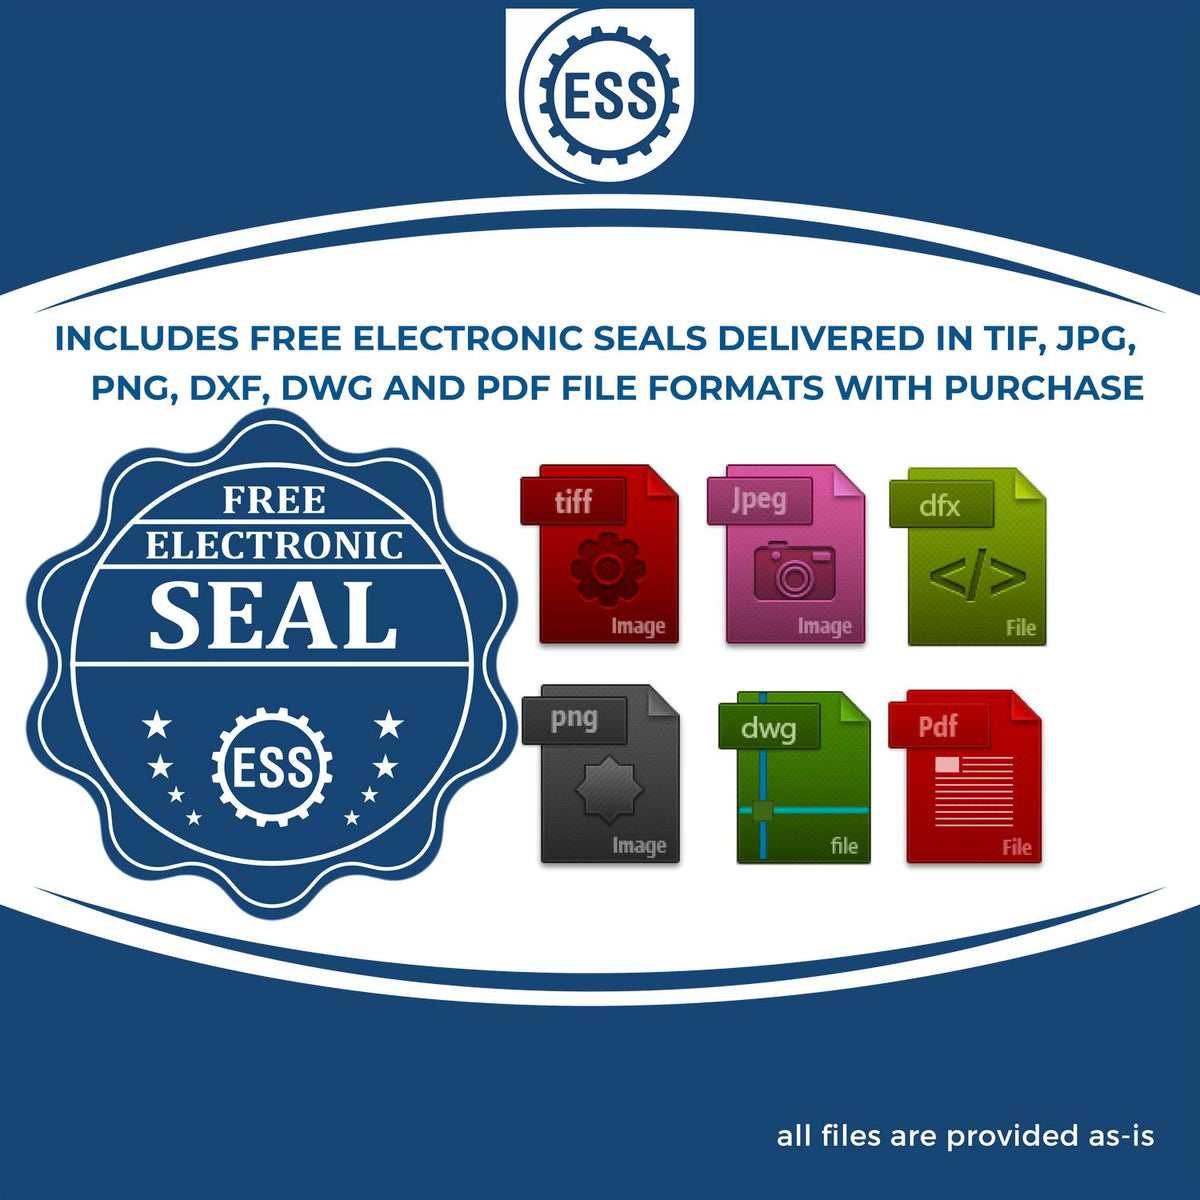 An infographic for the free electronic seal for the Self-Inking District of Columbia Geologist Stamp illustrating the different file type icons such as DXF, DWG, TIF, JPG and PNG.